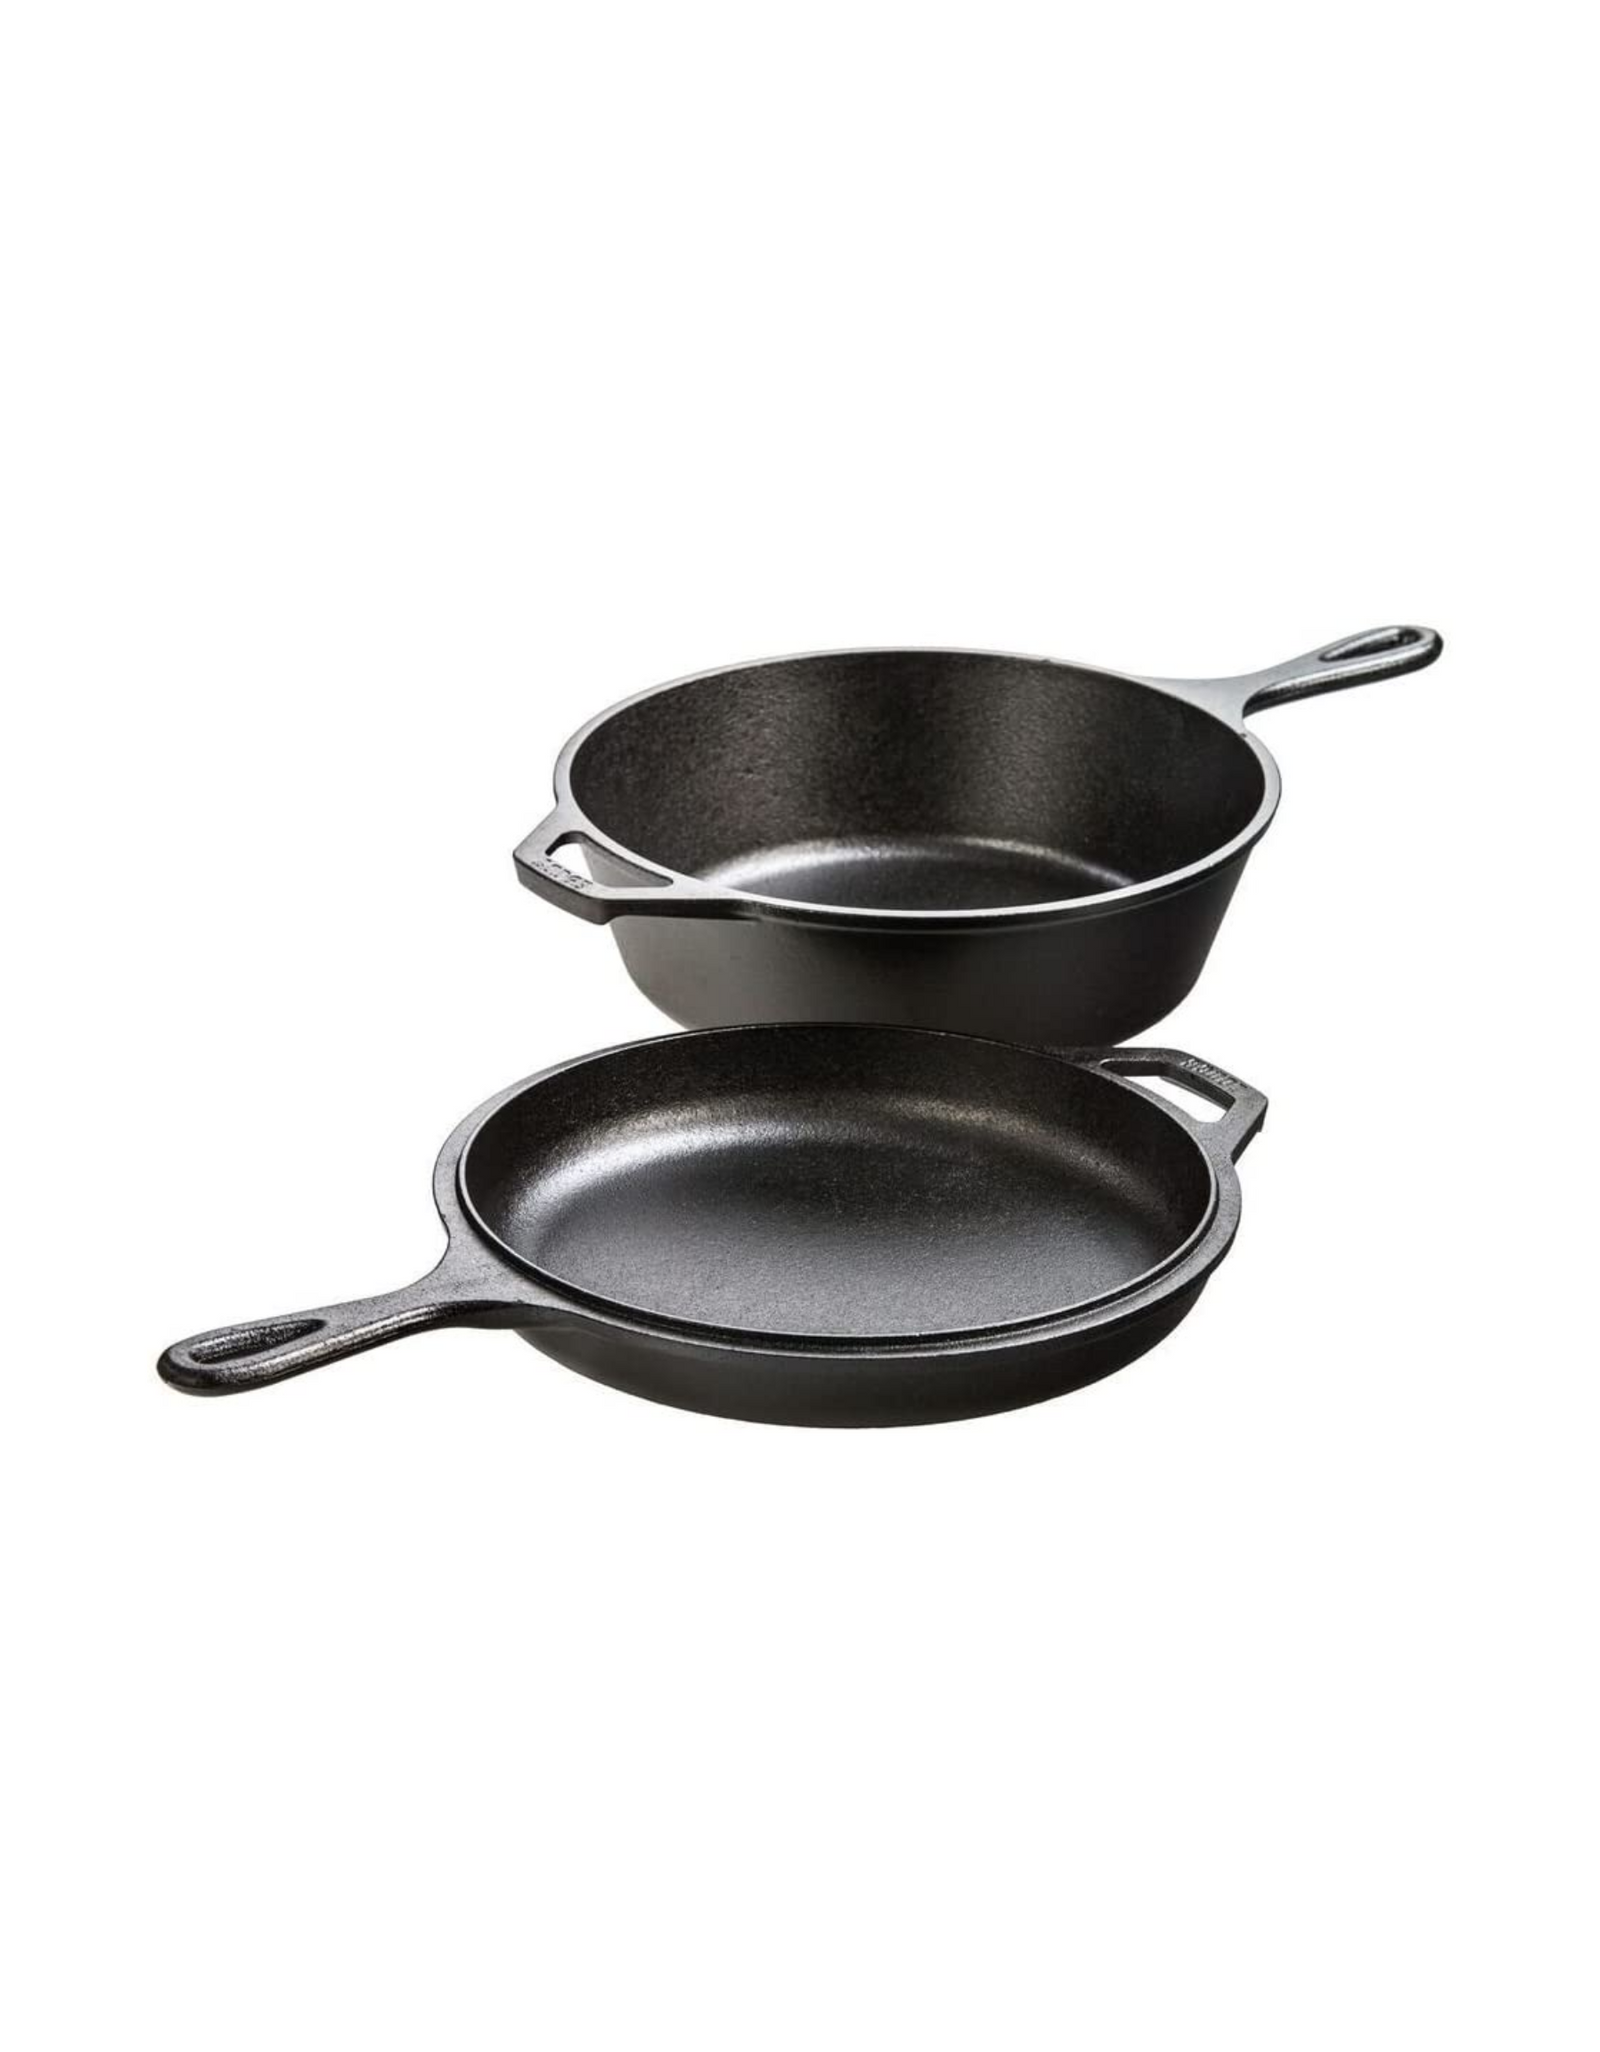 Lodge Combo Cooker Cast Iron, 10.25 Inch, Black